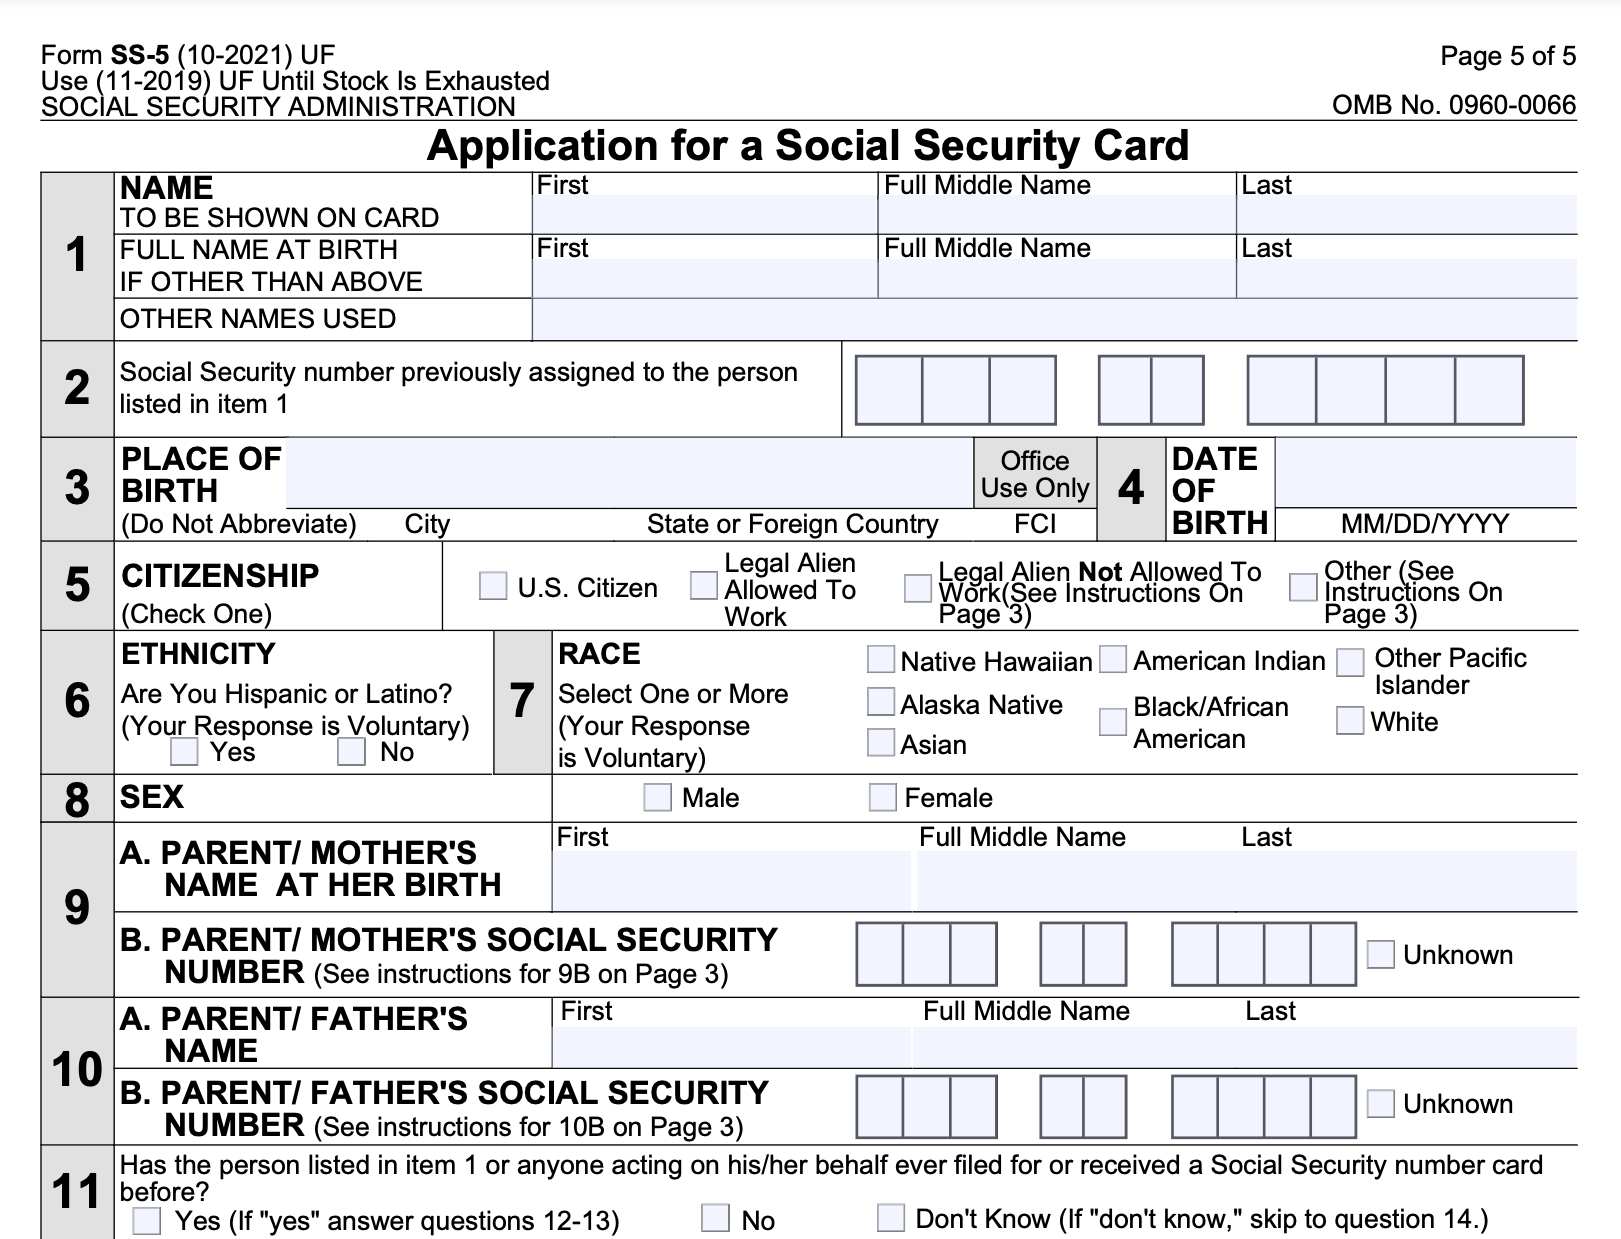 social-security-number-explained-boundless